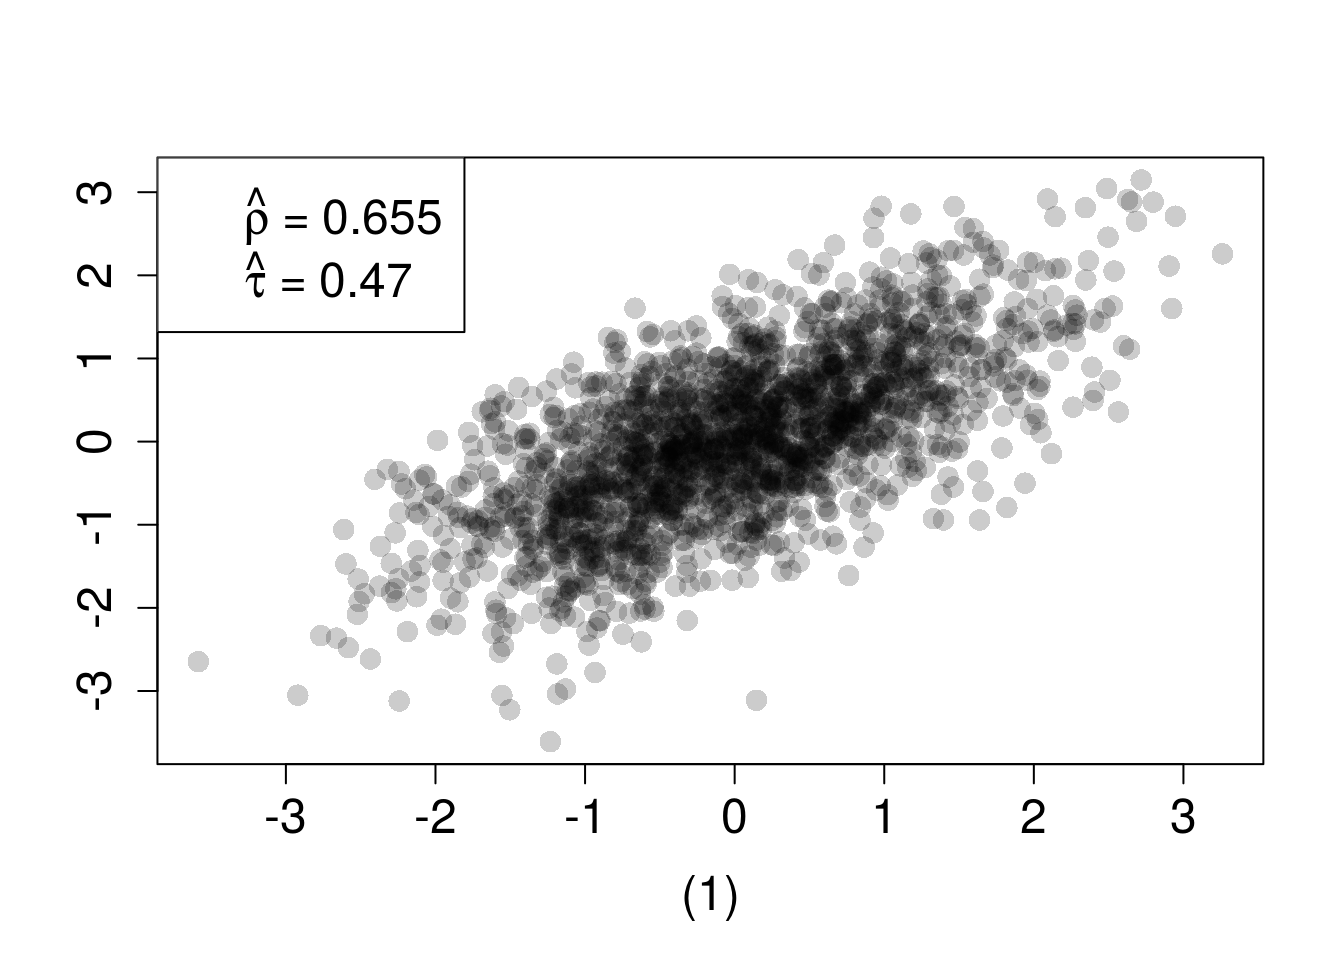 n=2000 random draws from the bivariate distribution constructed with a normal copula and (1) standard normal margins or (2) Student-$t_3$ and $exp(1)$ margins. True $\rho=0.6322$ and $\tau=0.4505$